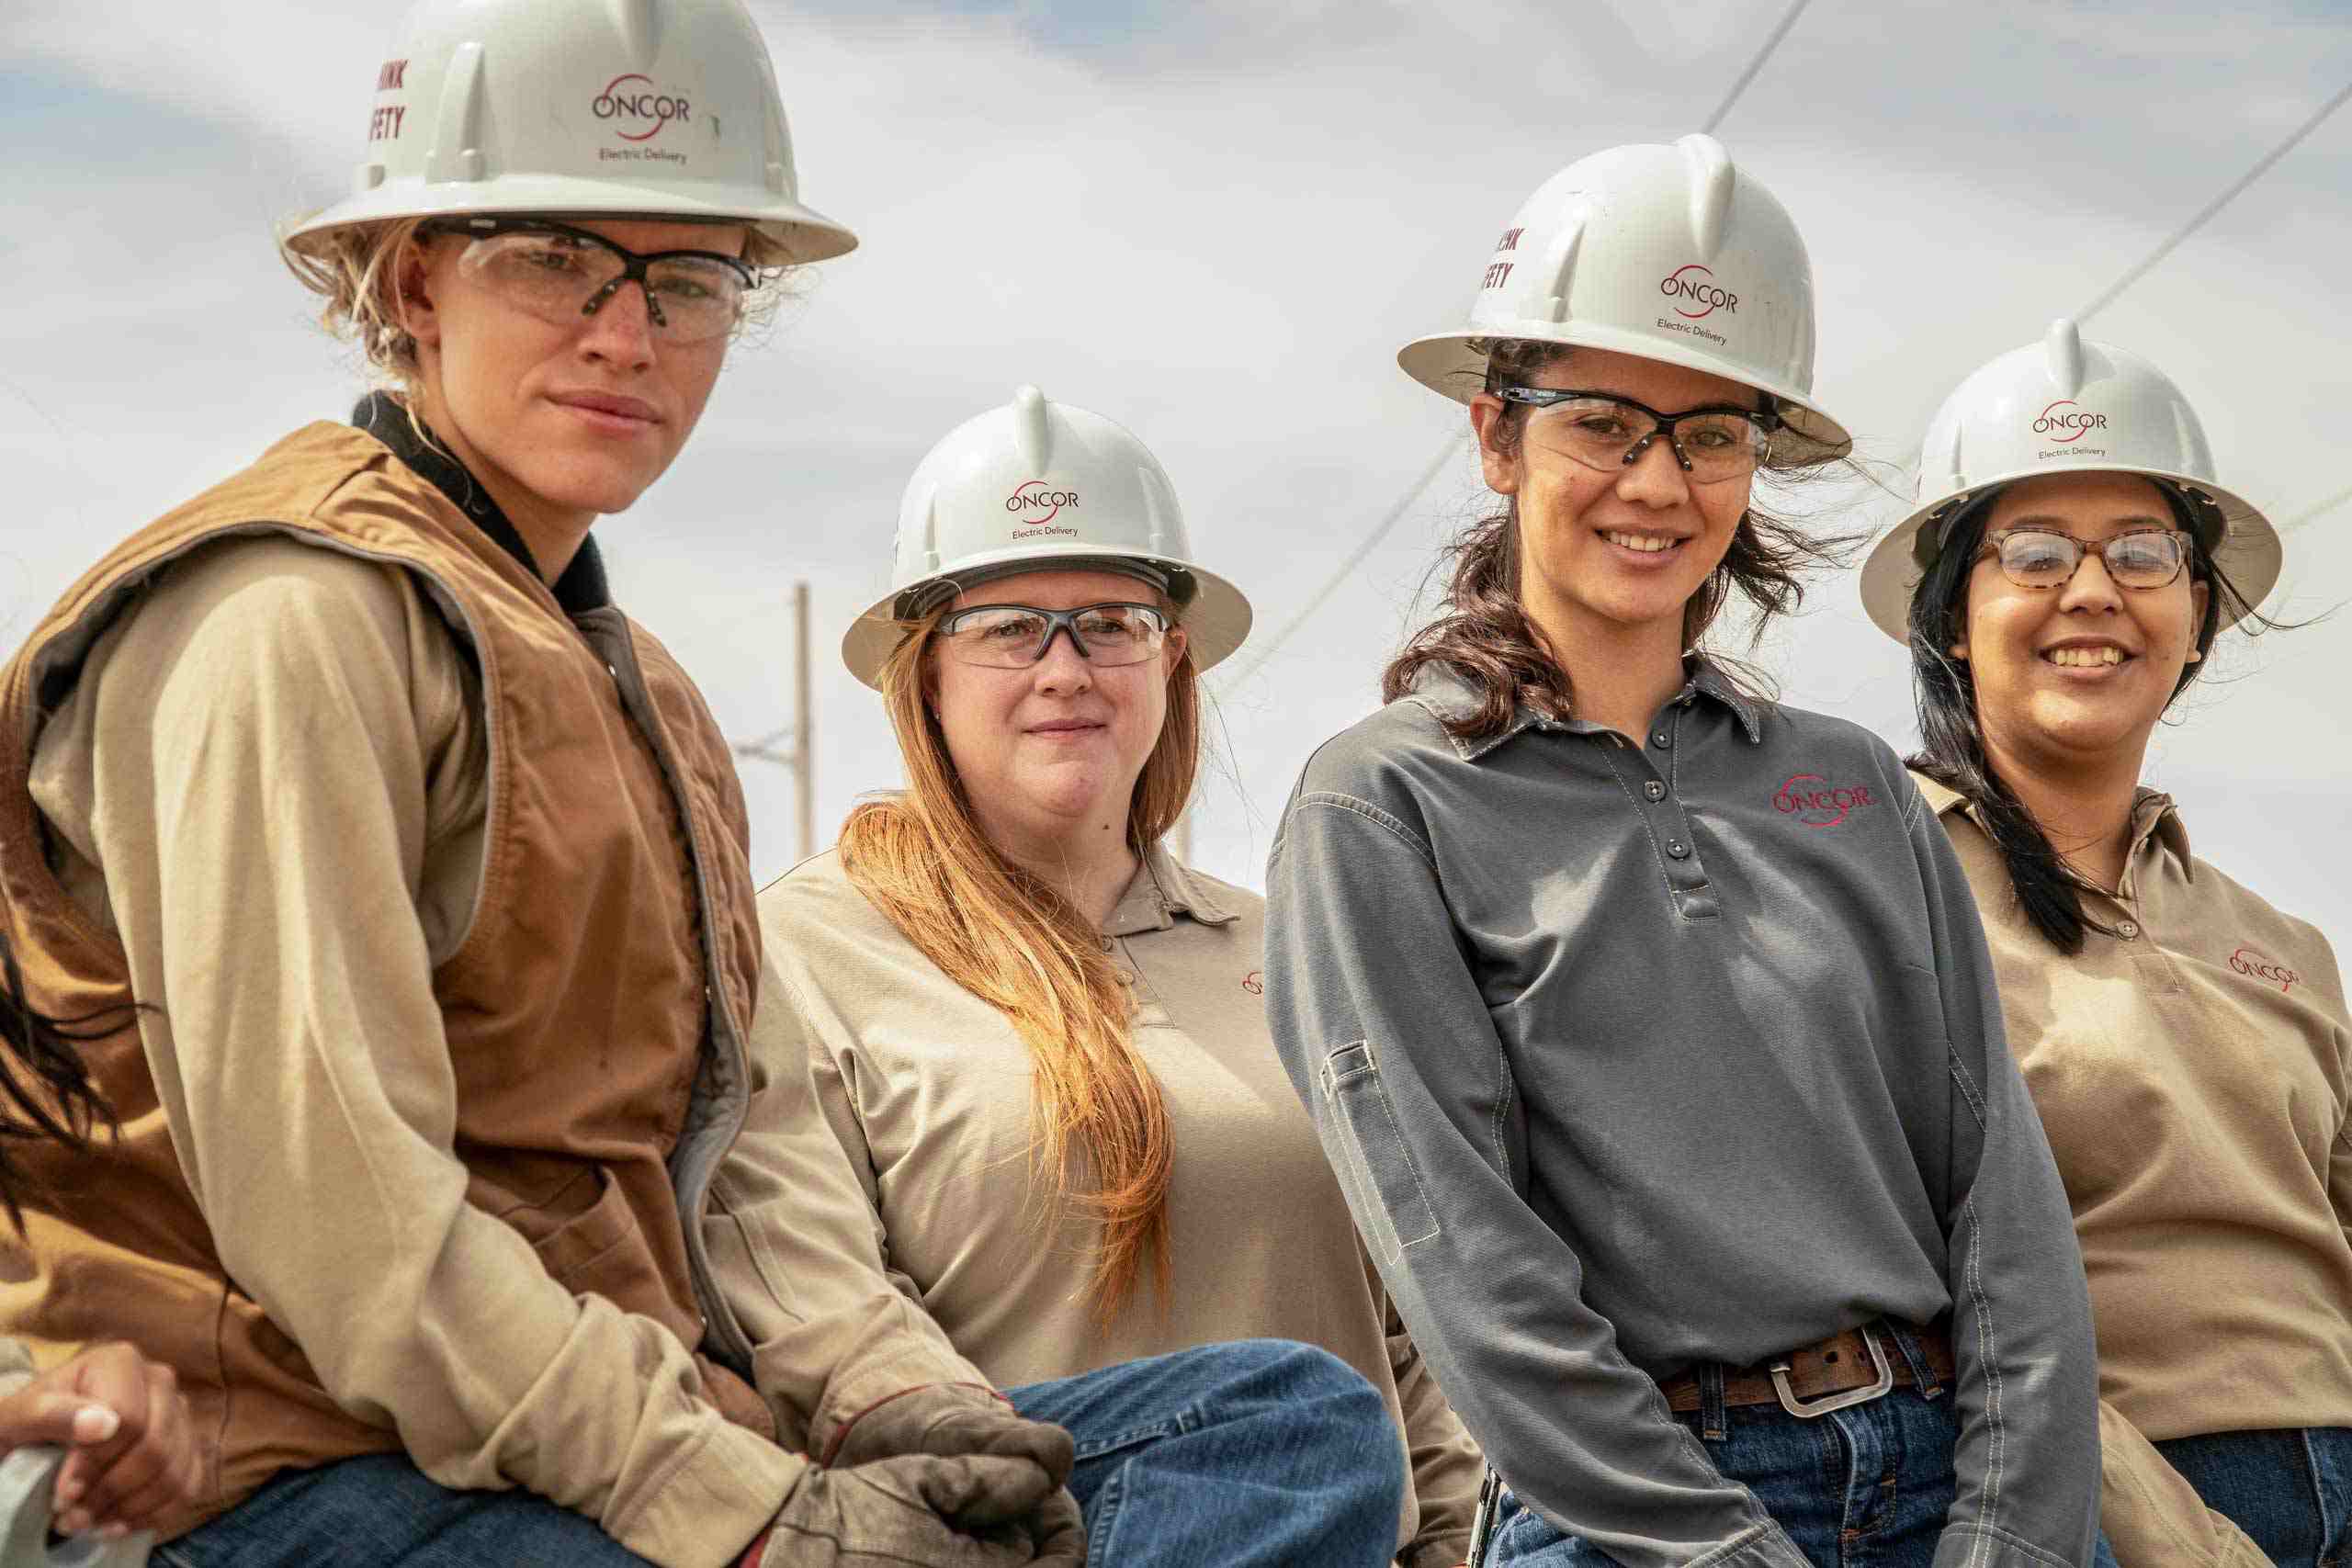 Empowering Portraits: Capturing Oncor Electric Employees' Confidence